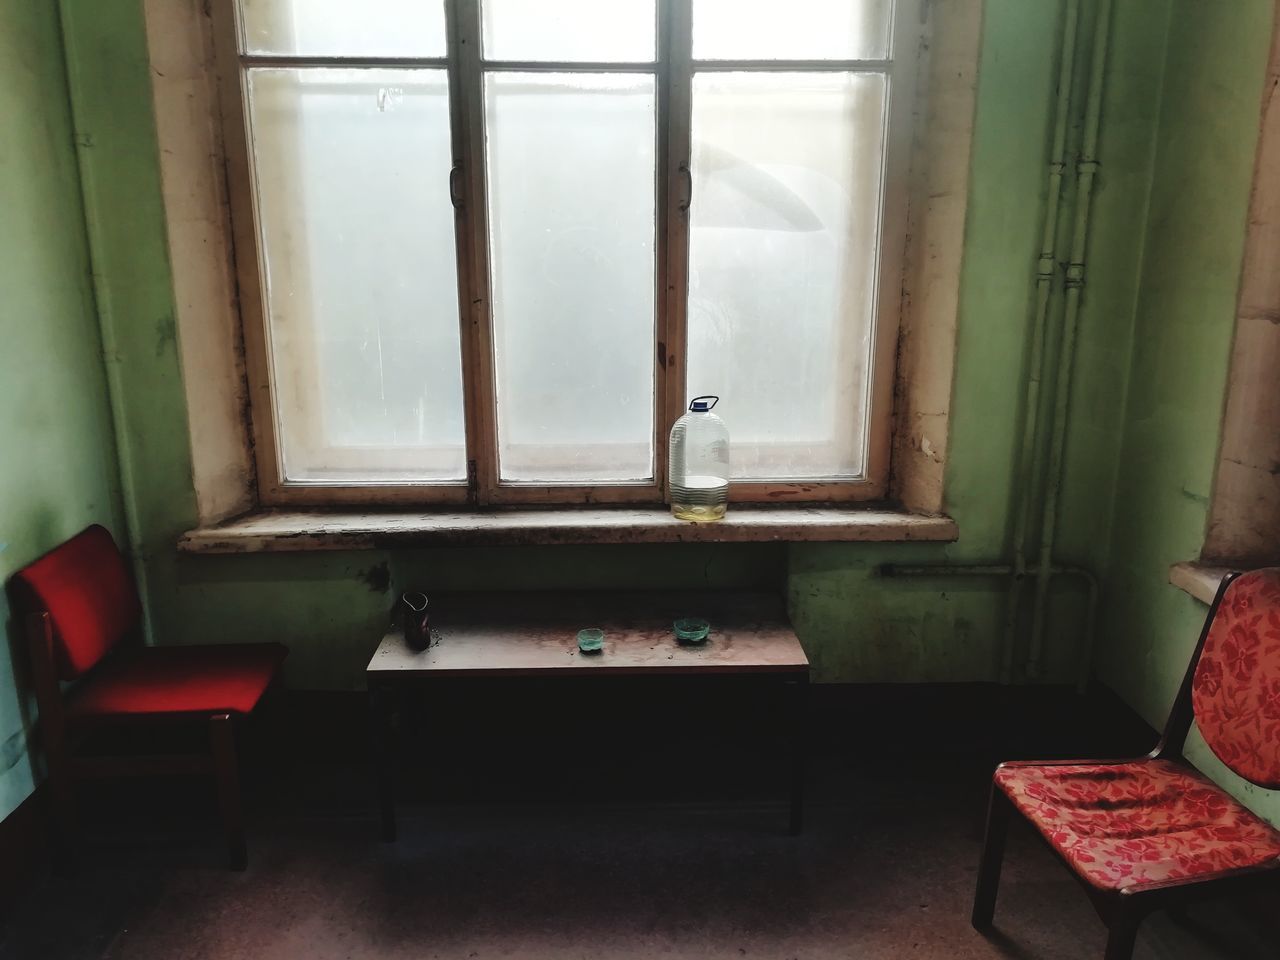 window, domestic room, indoors, home interior, home, no people, seat, furniture, absence, day, chair, table, empty, curtain, sink, house, home showcase interior, wood - material, flooring